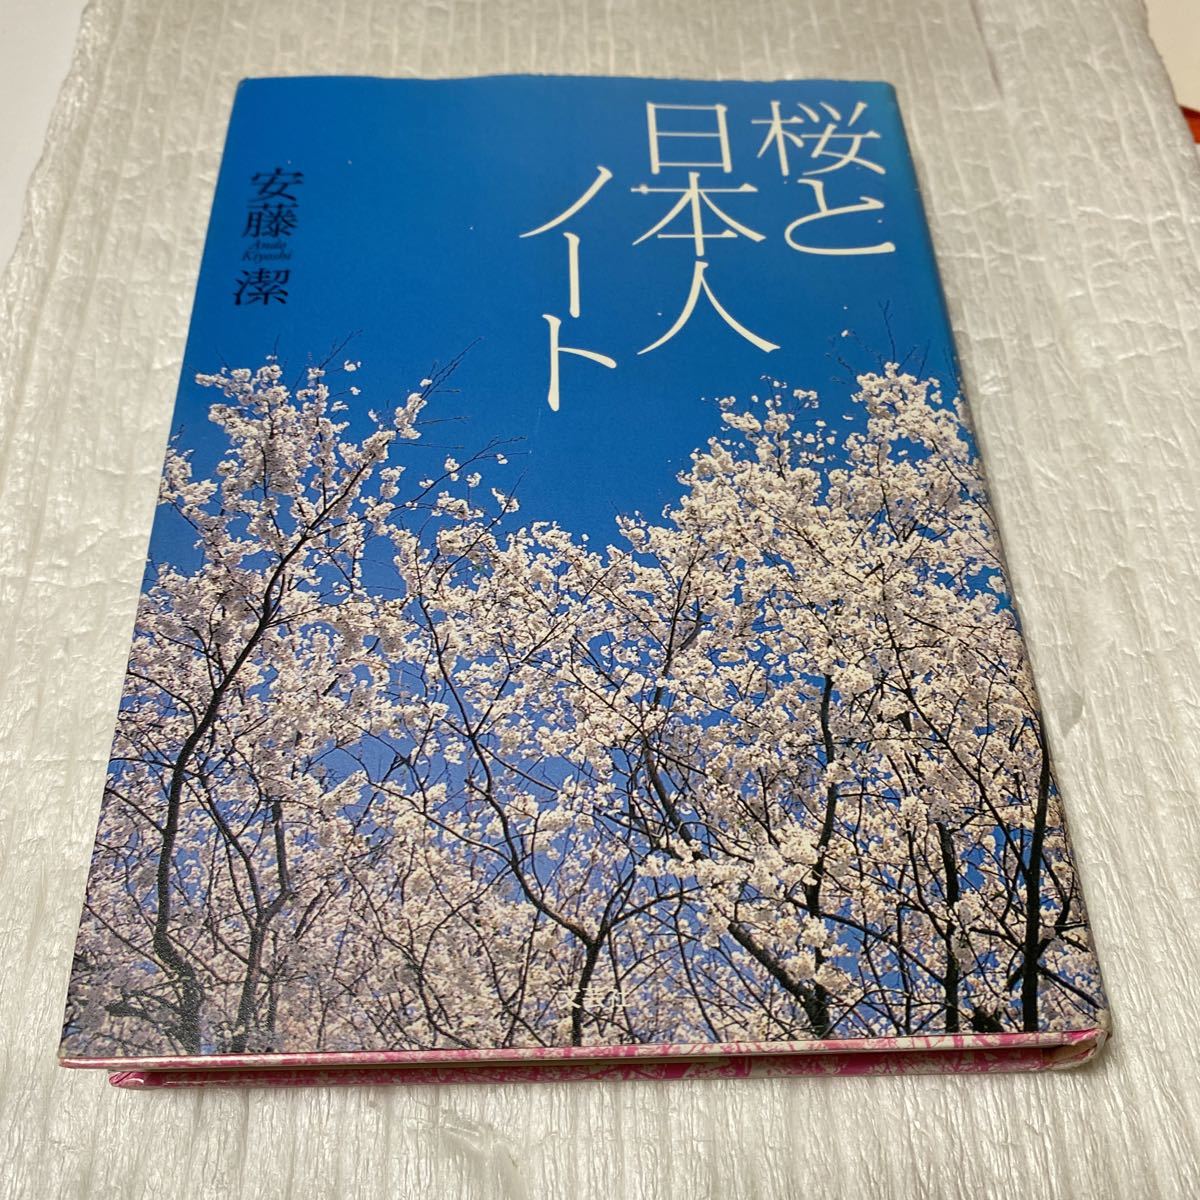 Cherry Blossoms and Notes on the Japanese/Kiyoshi Ando (Author), Painting, Oil painting, Nature, Landscape painting